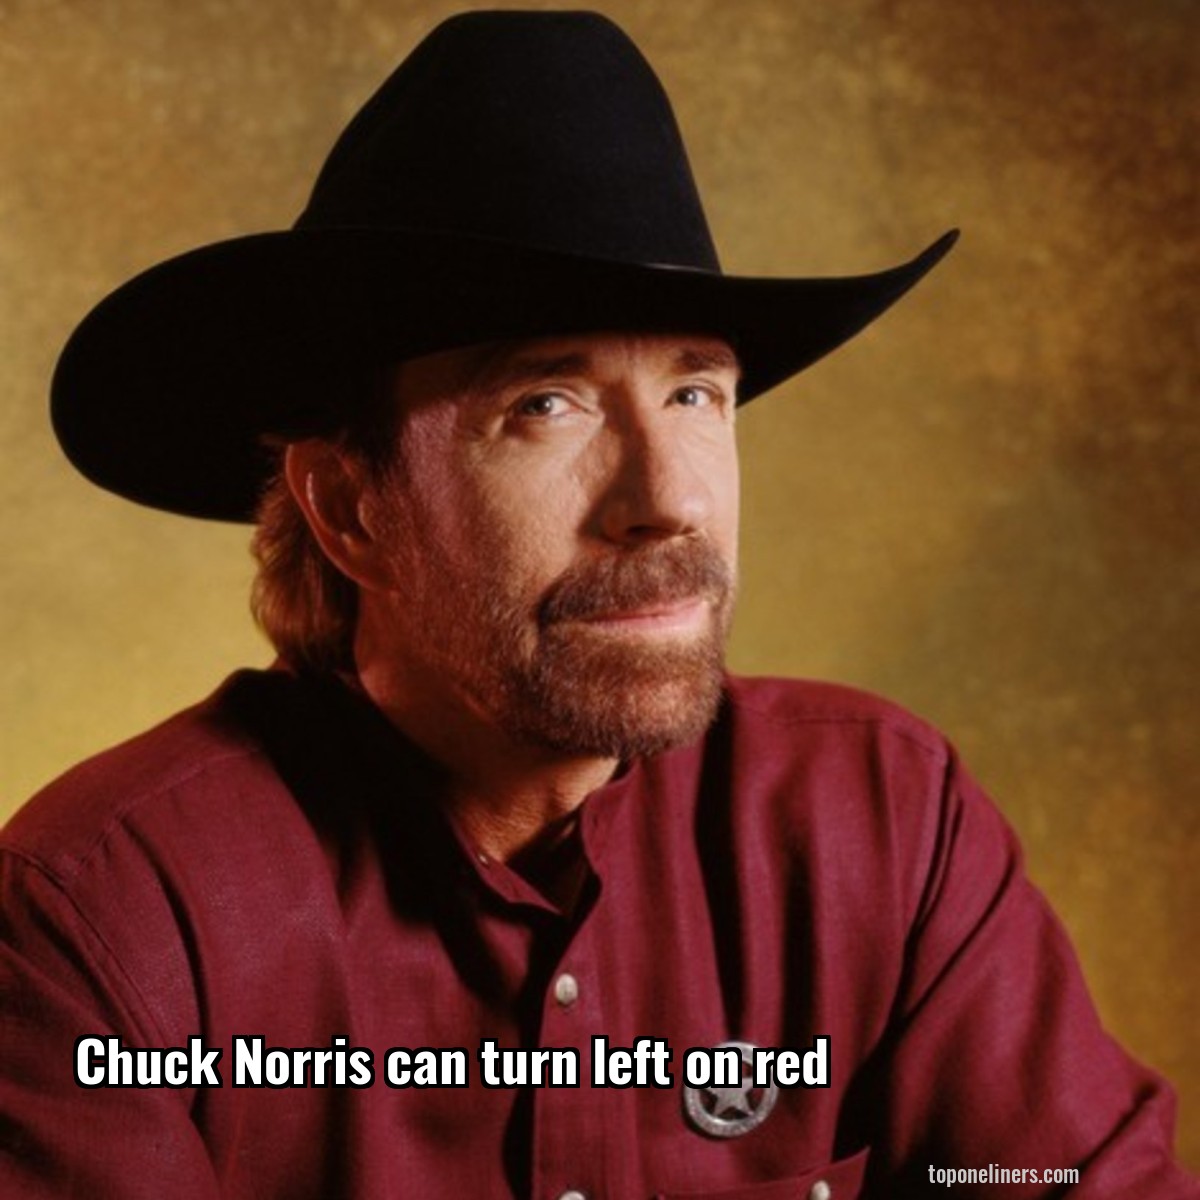 Chuck Norris can turn left on red